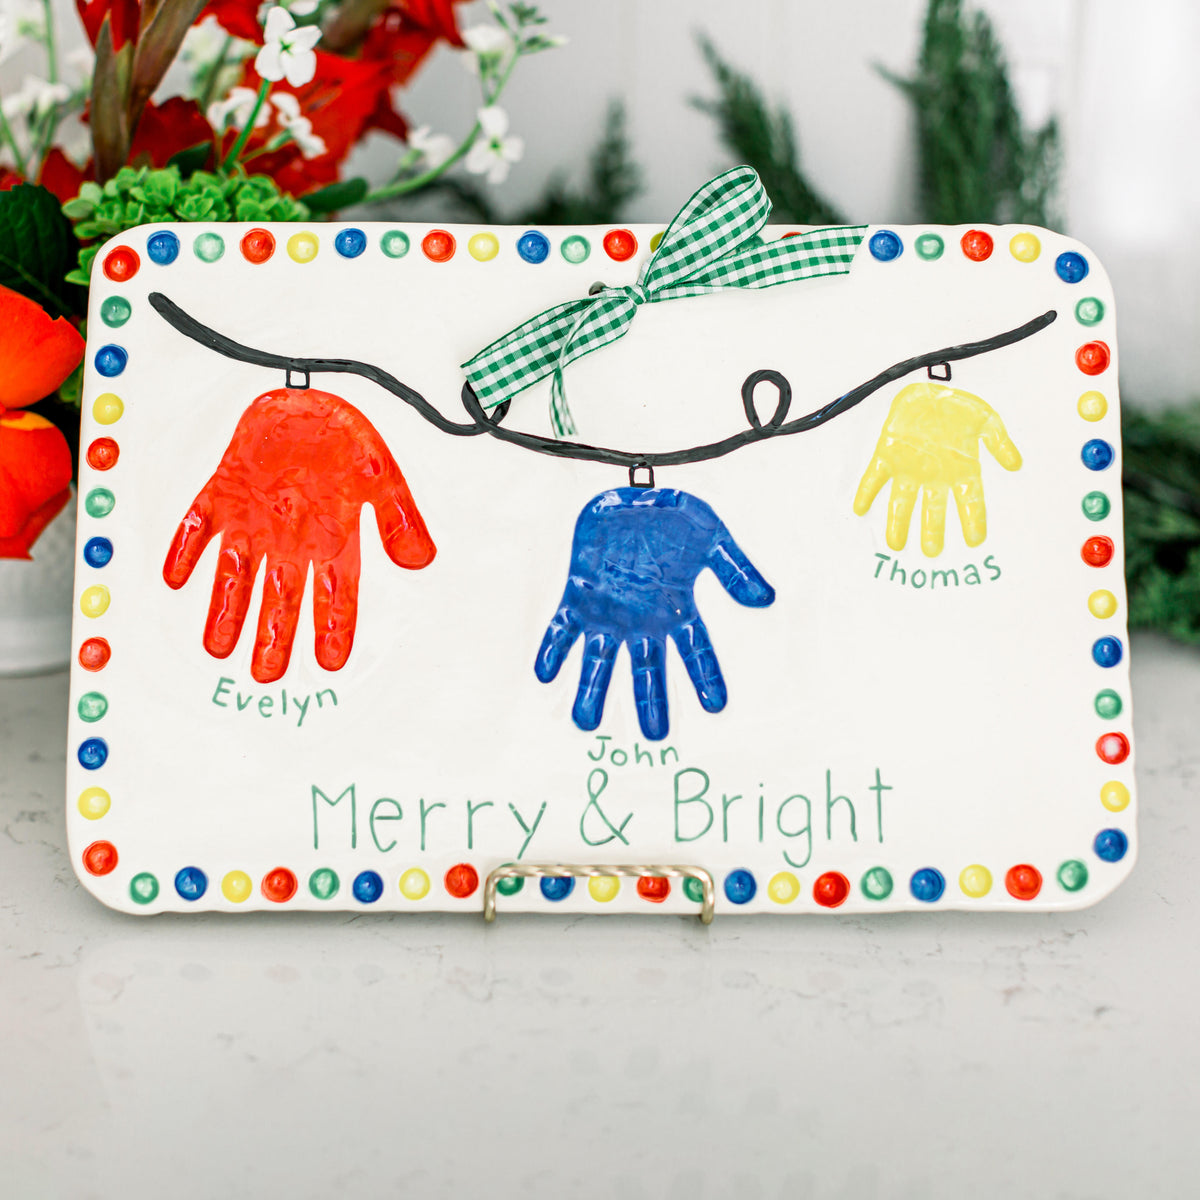 Merry & Bright Plate (In-Person)